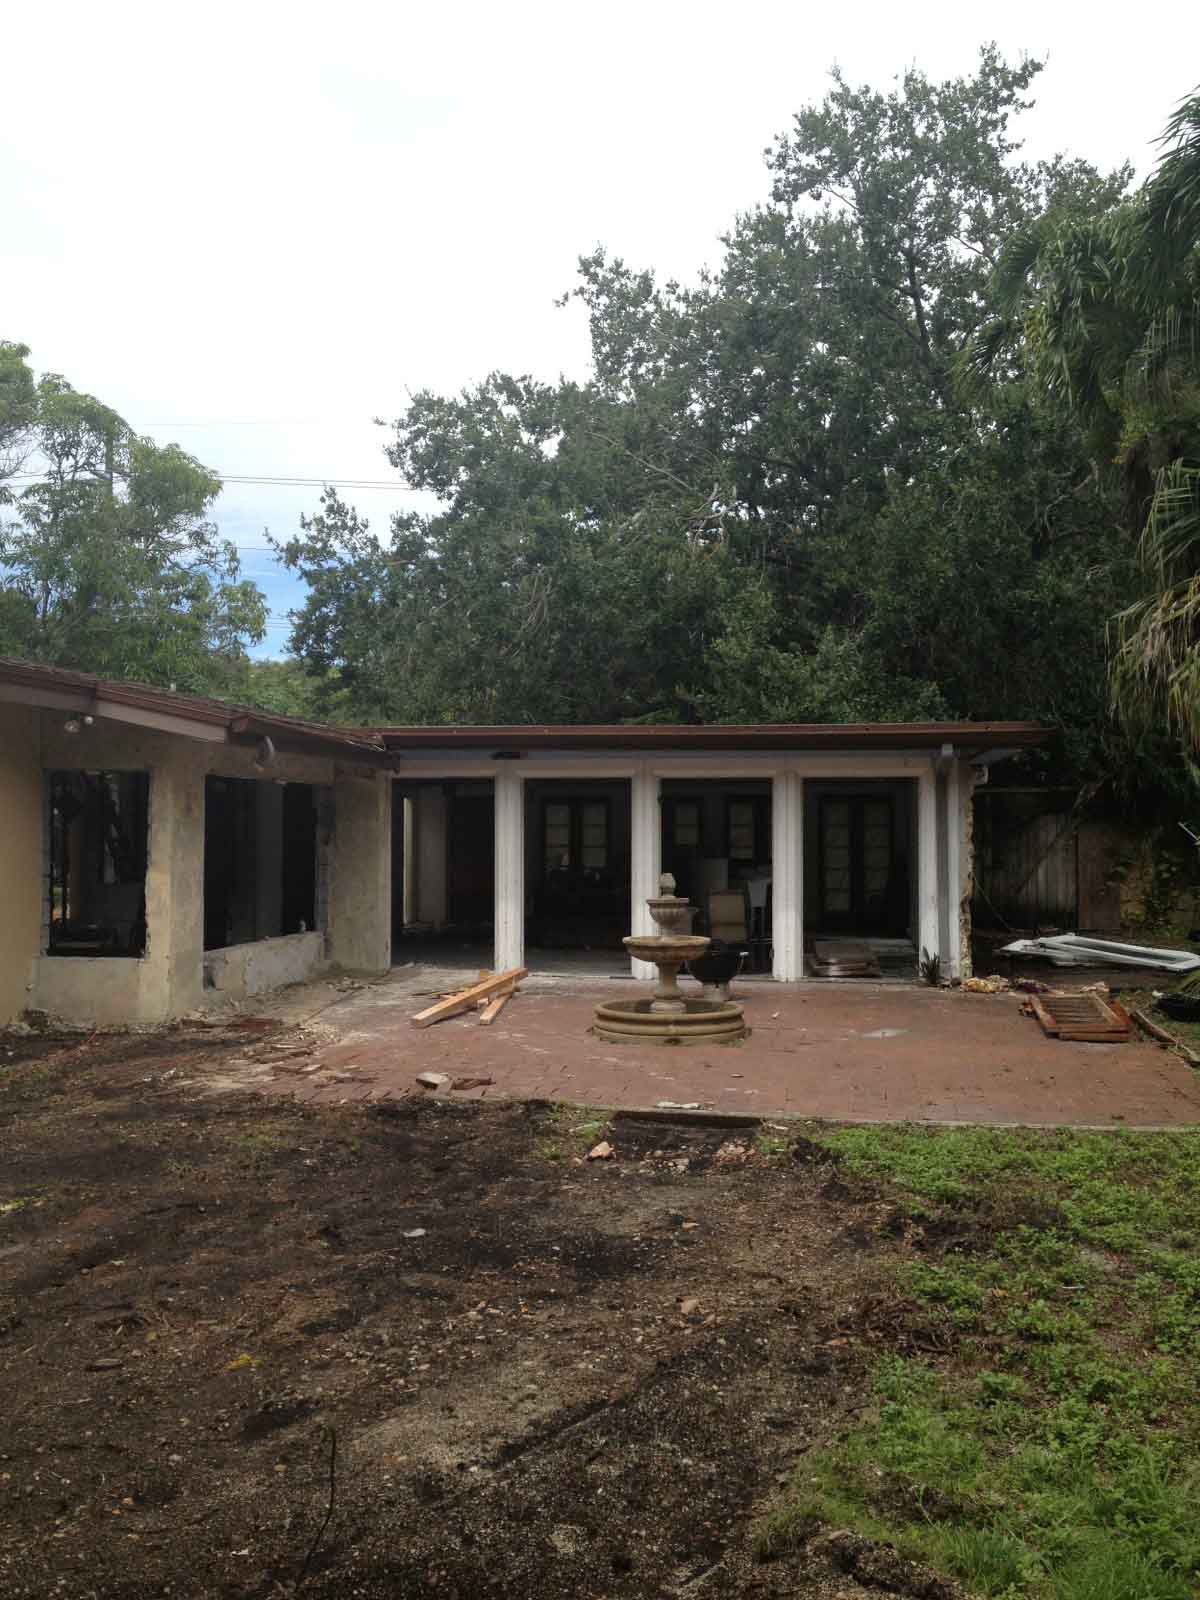 Pinecrest Remodel structural demo and support